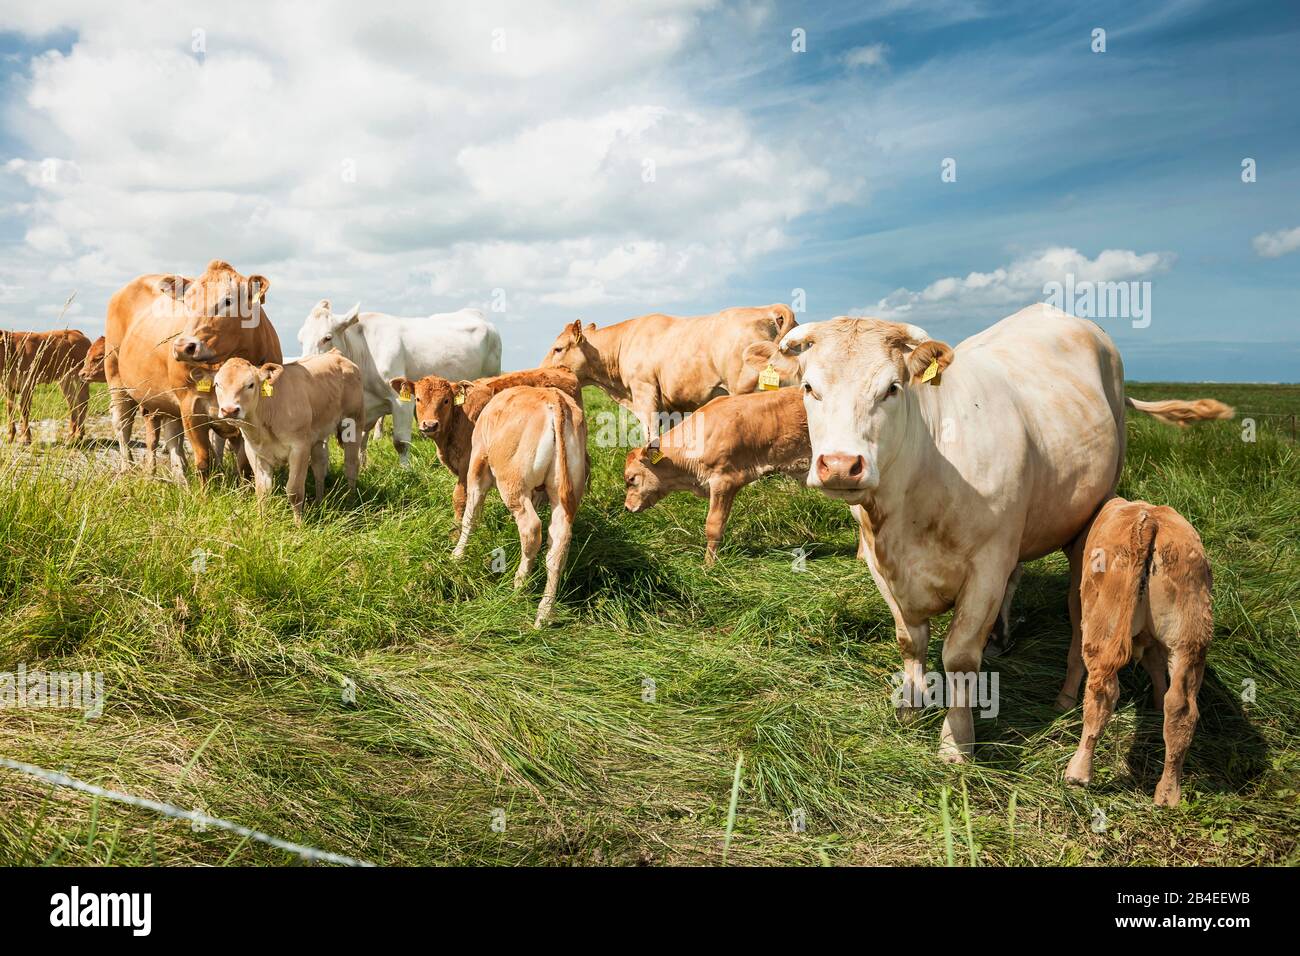 Agriculture, animal husbandry, herd of cows on pasture, cattle breed Charolais, with calves Stock Photo